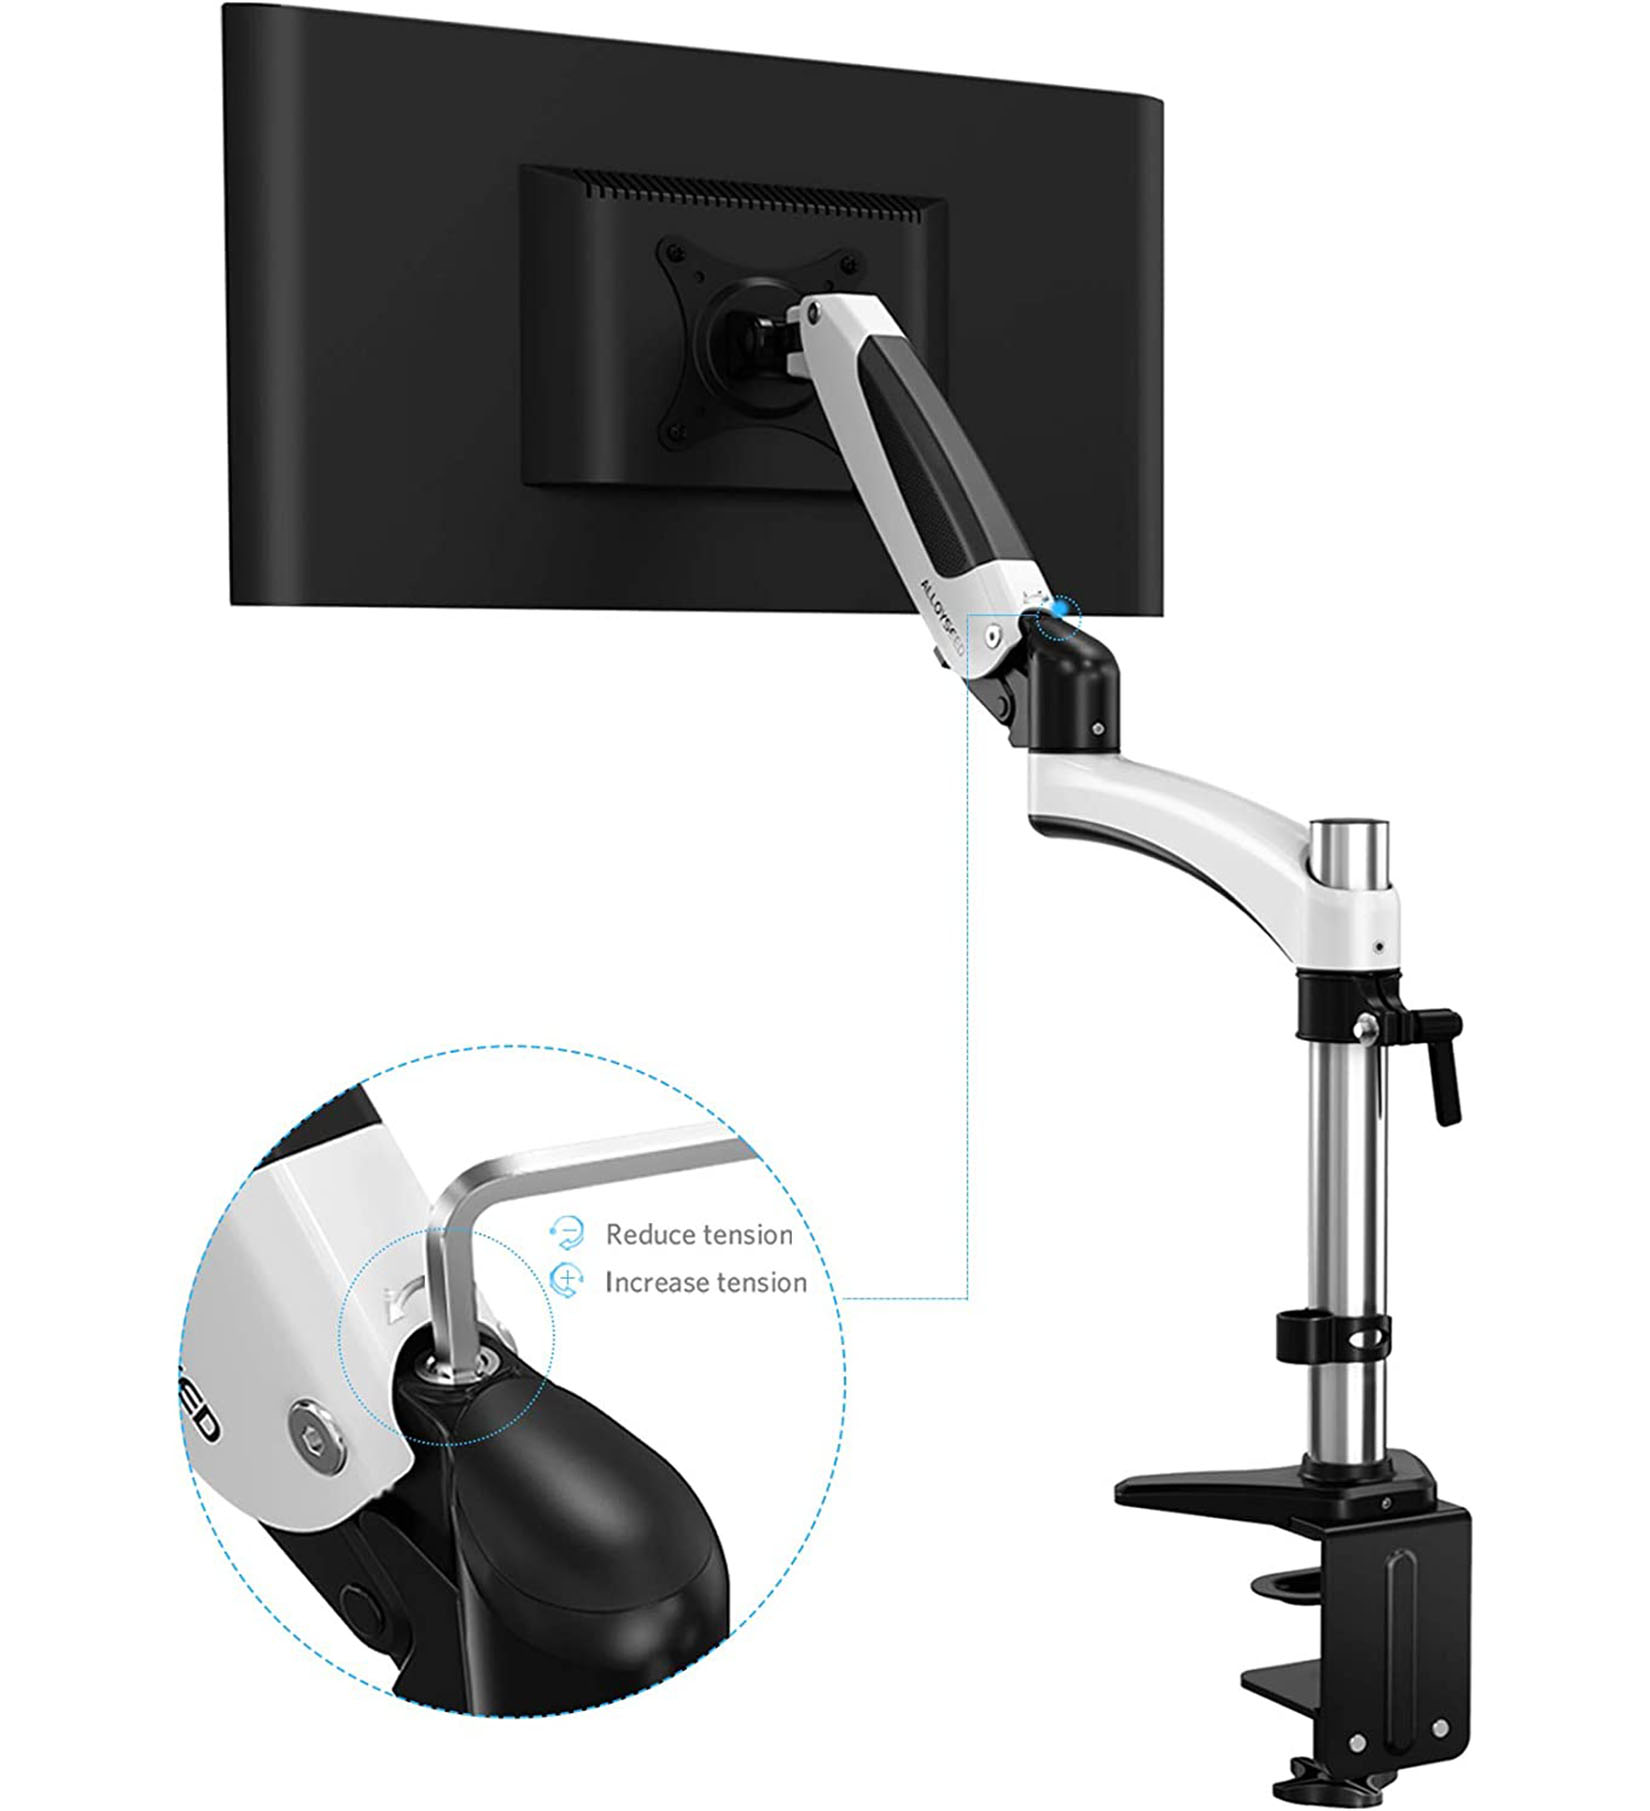 Monitor Mount Stand, Monitor Riser for 15 to 27 Inch,Holds up to 17.6lbs - image 4 of 7